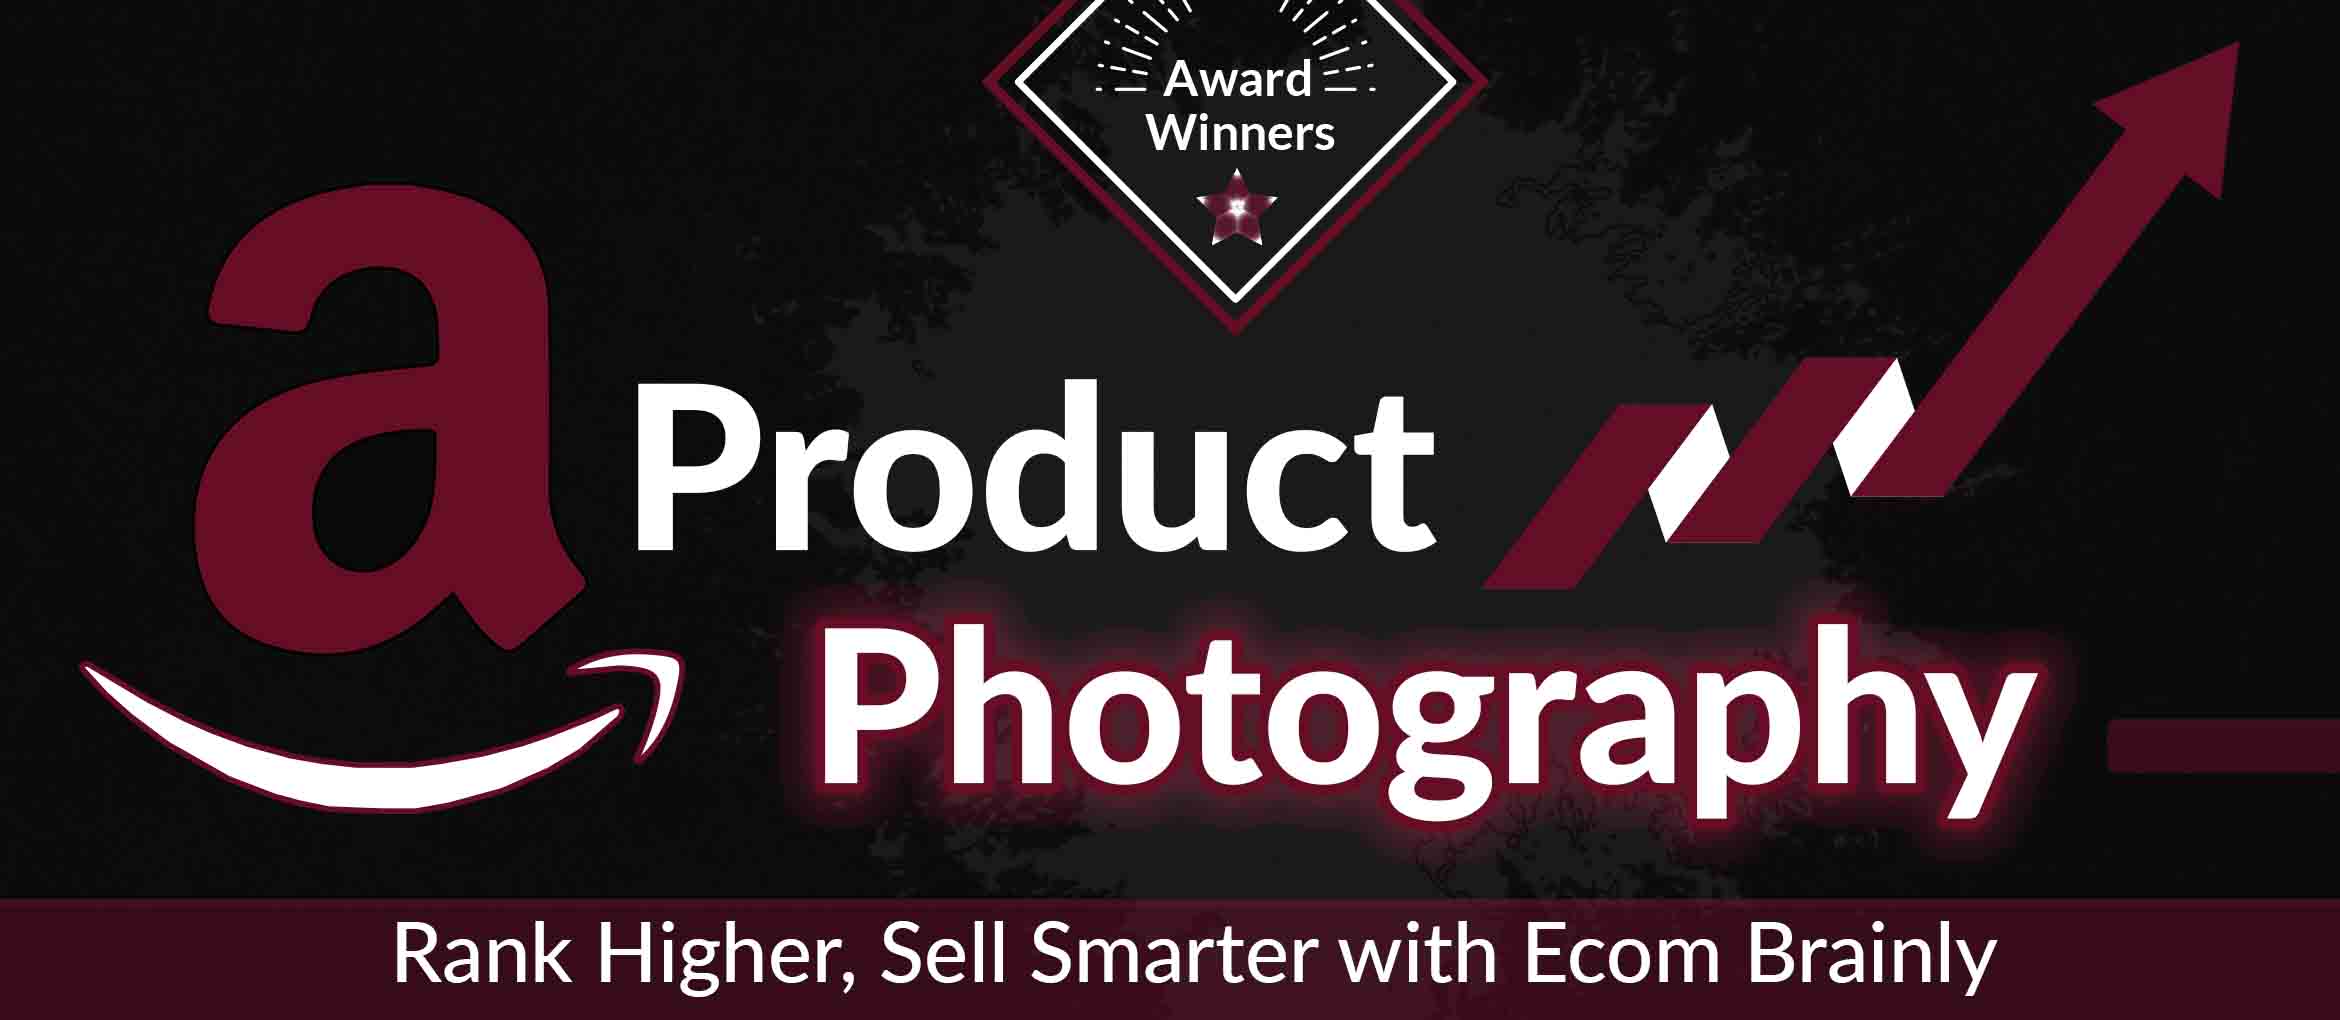 Amazon Product Photography Services